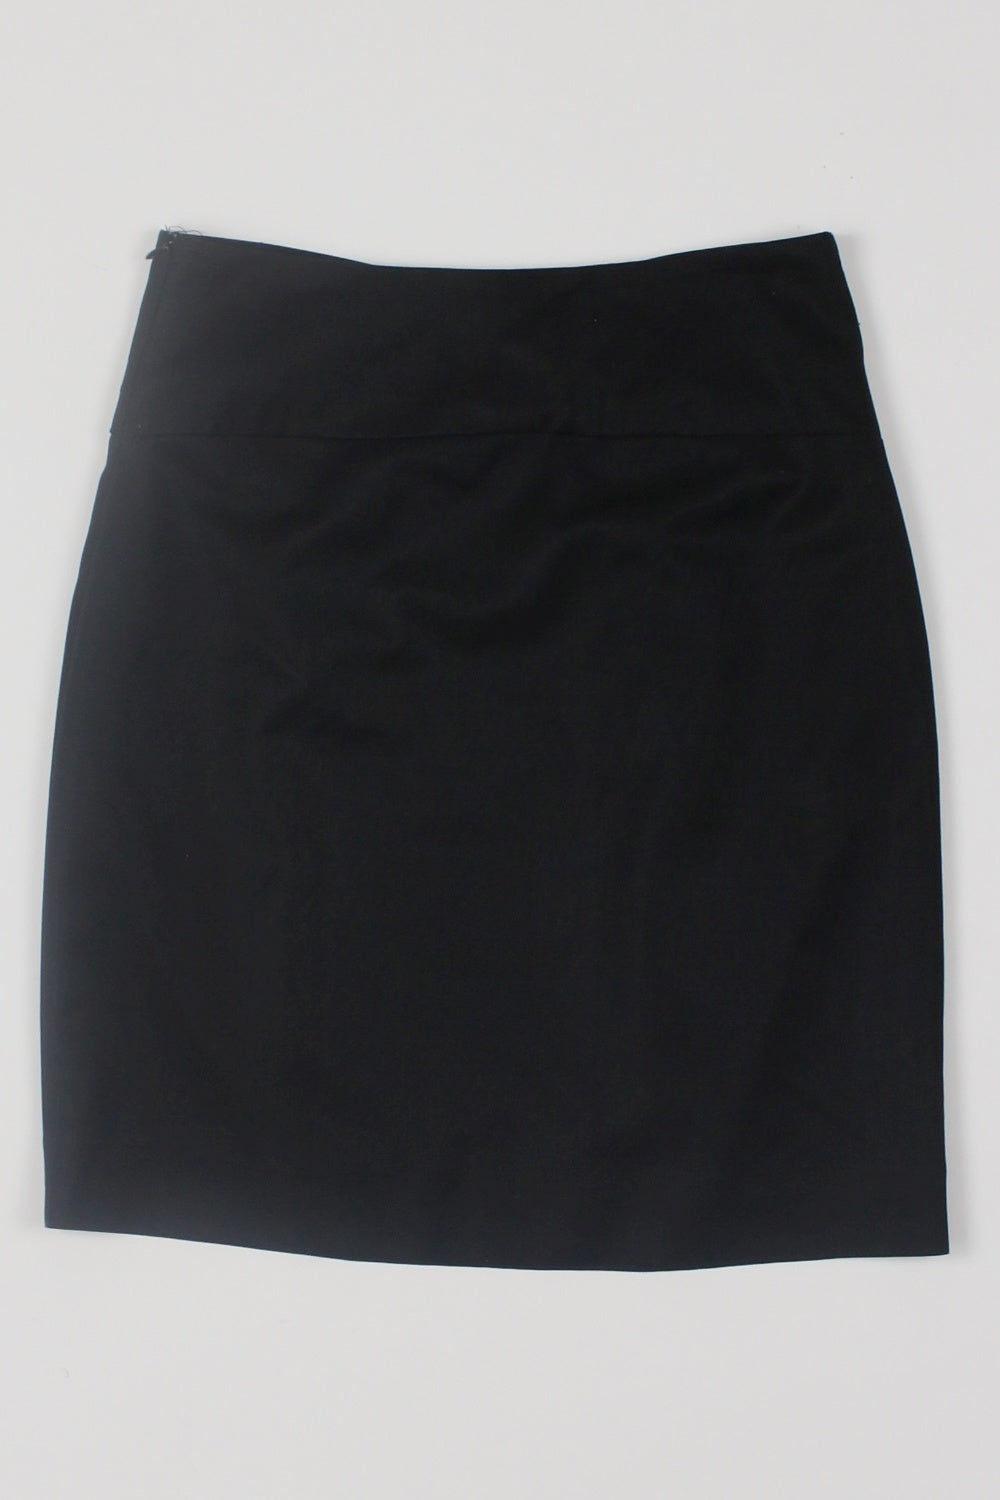 Witchery Black Bow Front Wool Blend Skirt 10